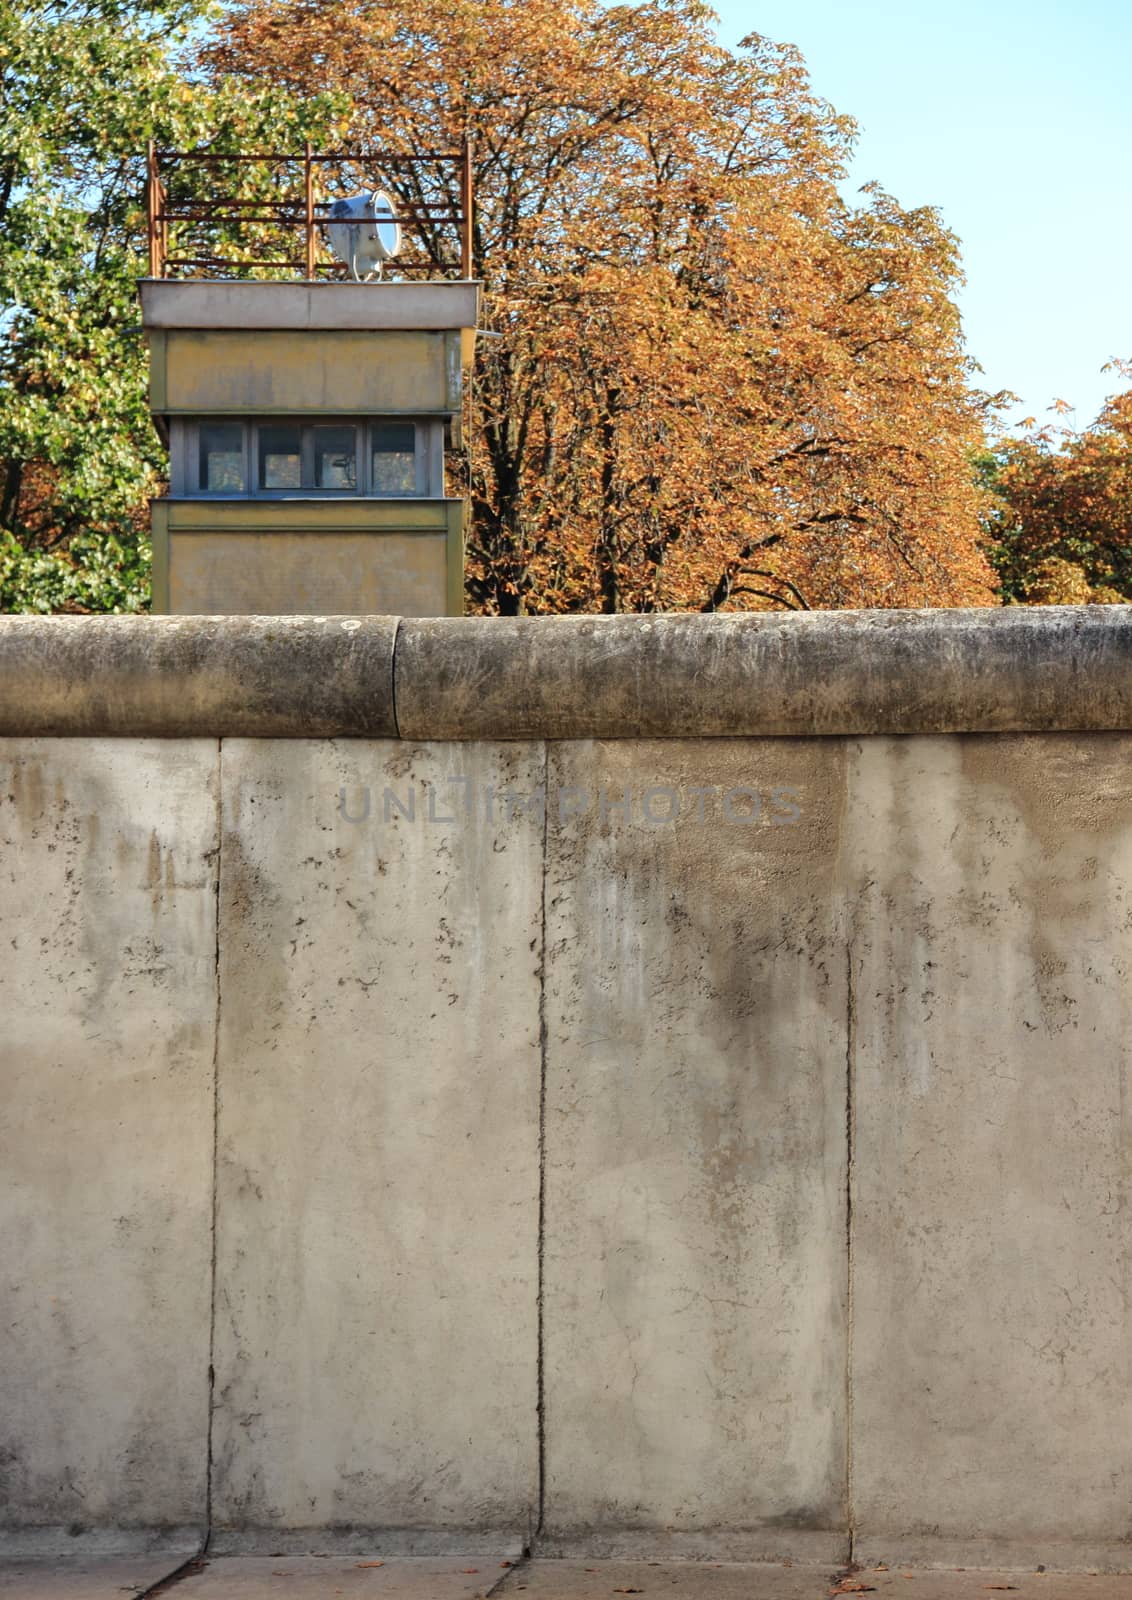 Berlin wall Germany with guard tower in autumn